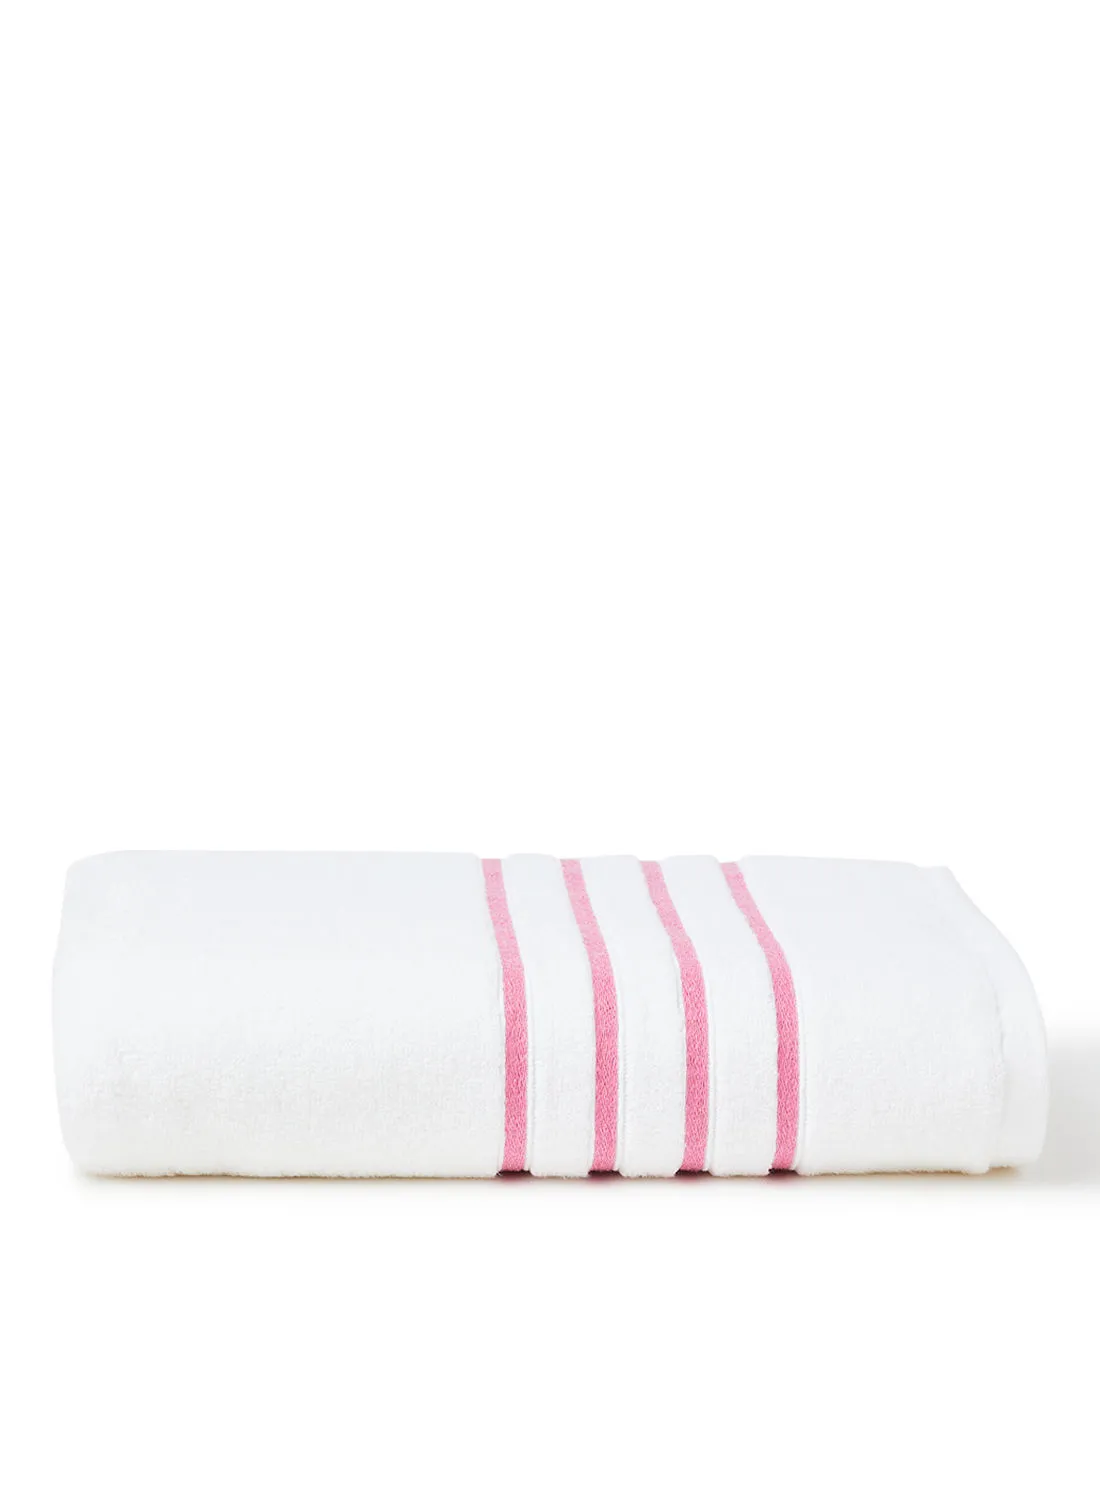 White Rose 100% Cotton Zero Twist 550 Gsm With Color Lining Style Bath Sheet White/Pink 80x160cm